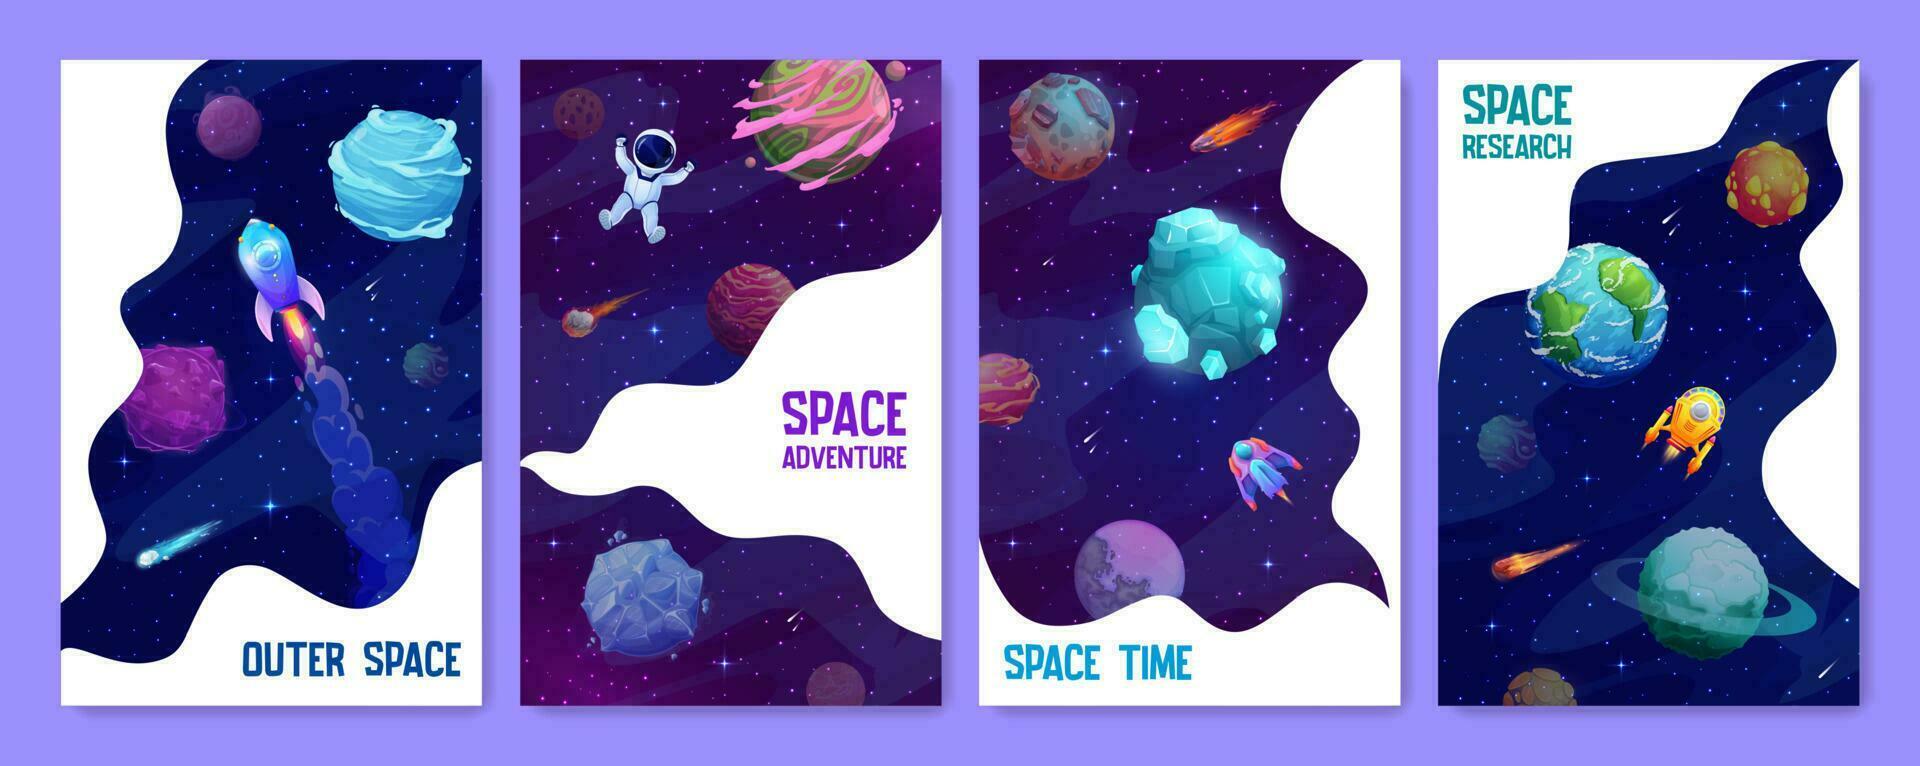 Space landing pages, starry galaxy and planets vector